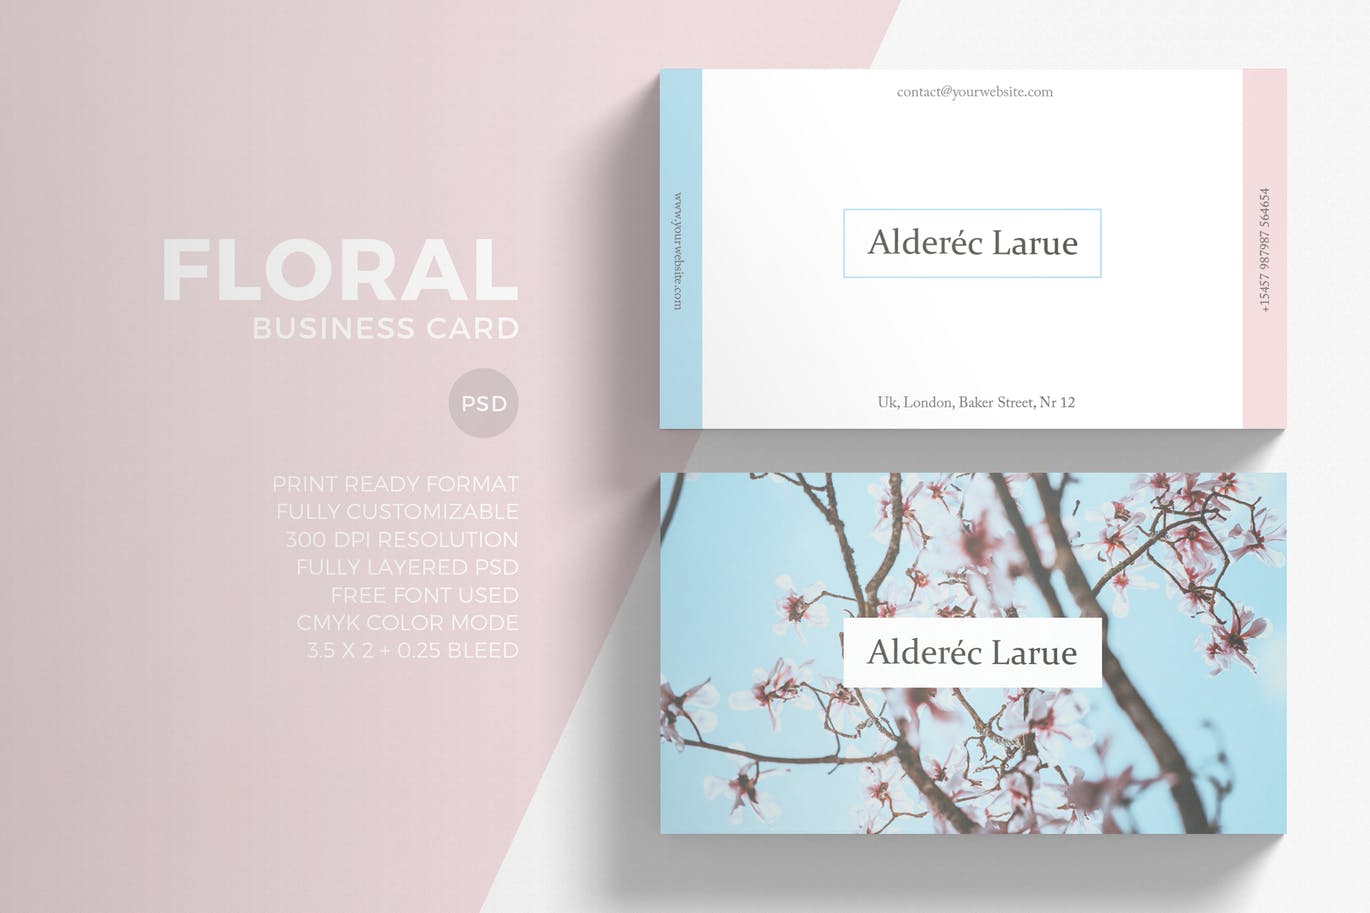 Business card with floral style